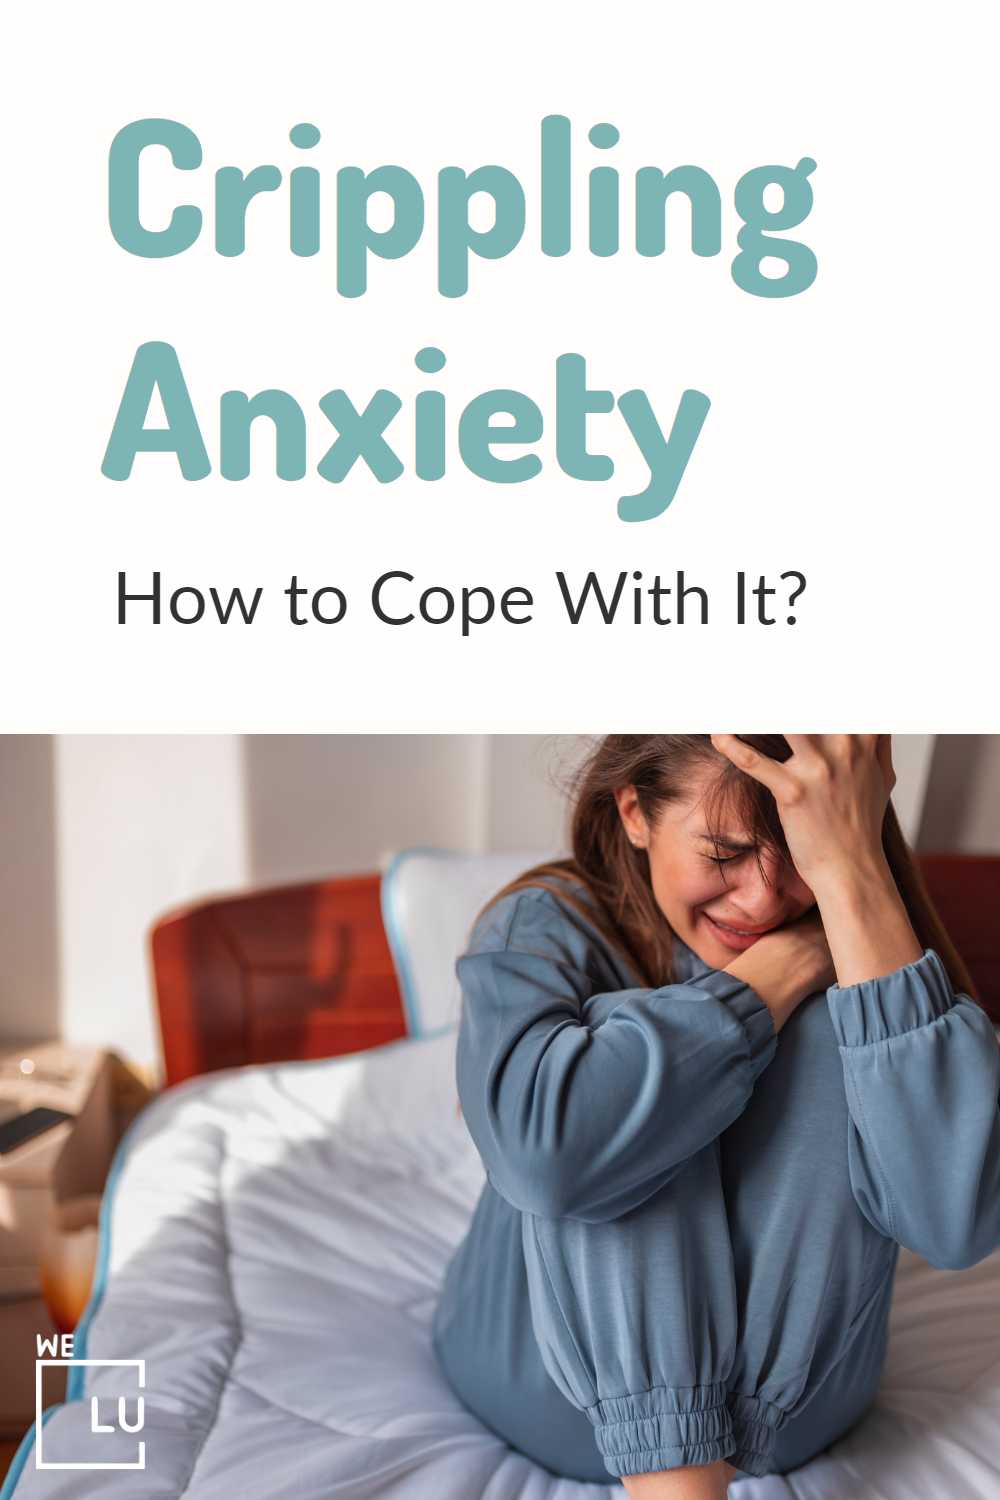 Crippling Anxiety, How to Cope With It